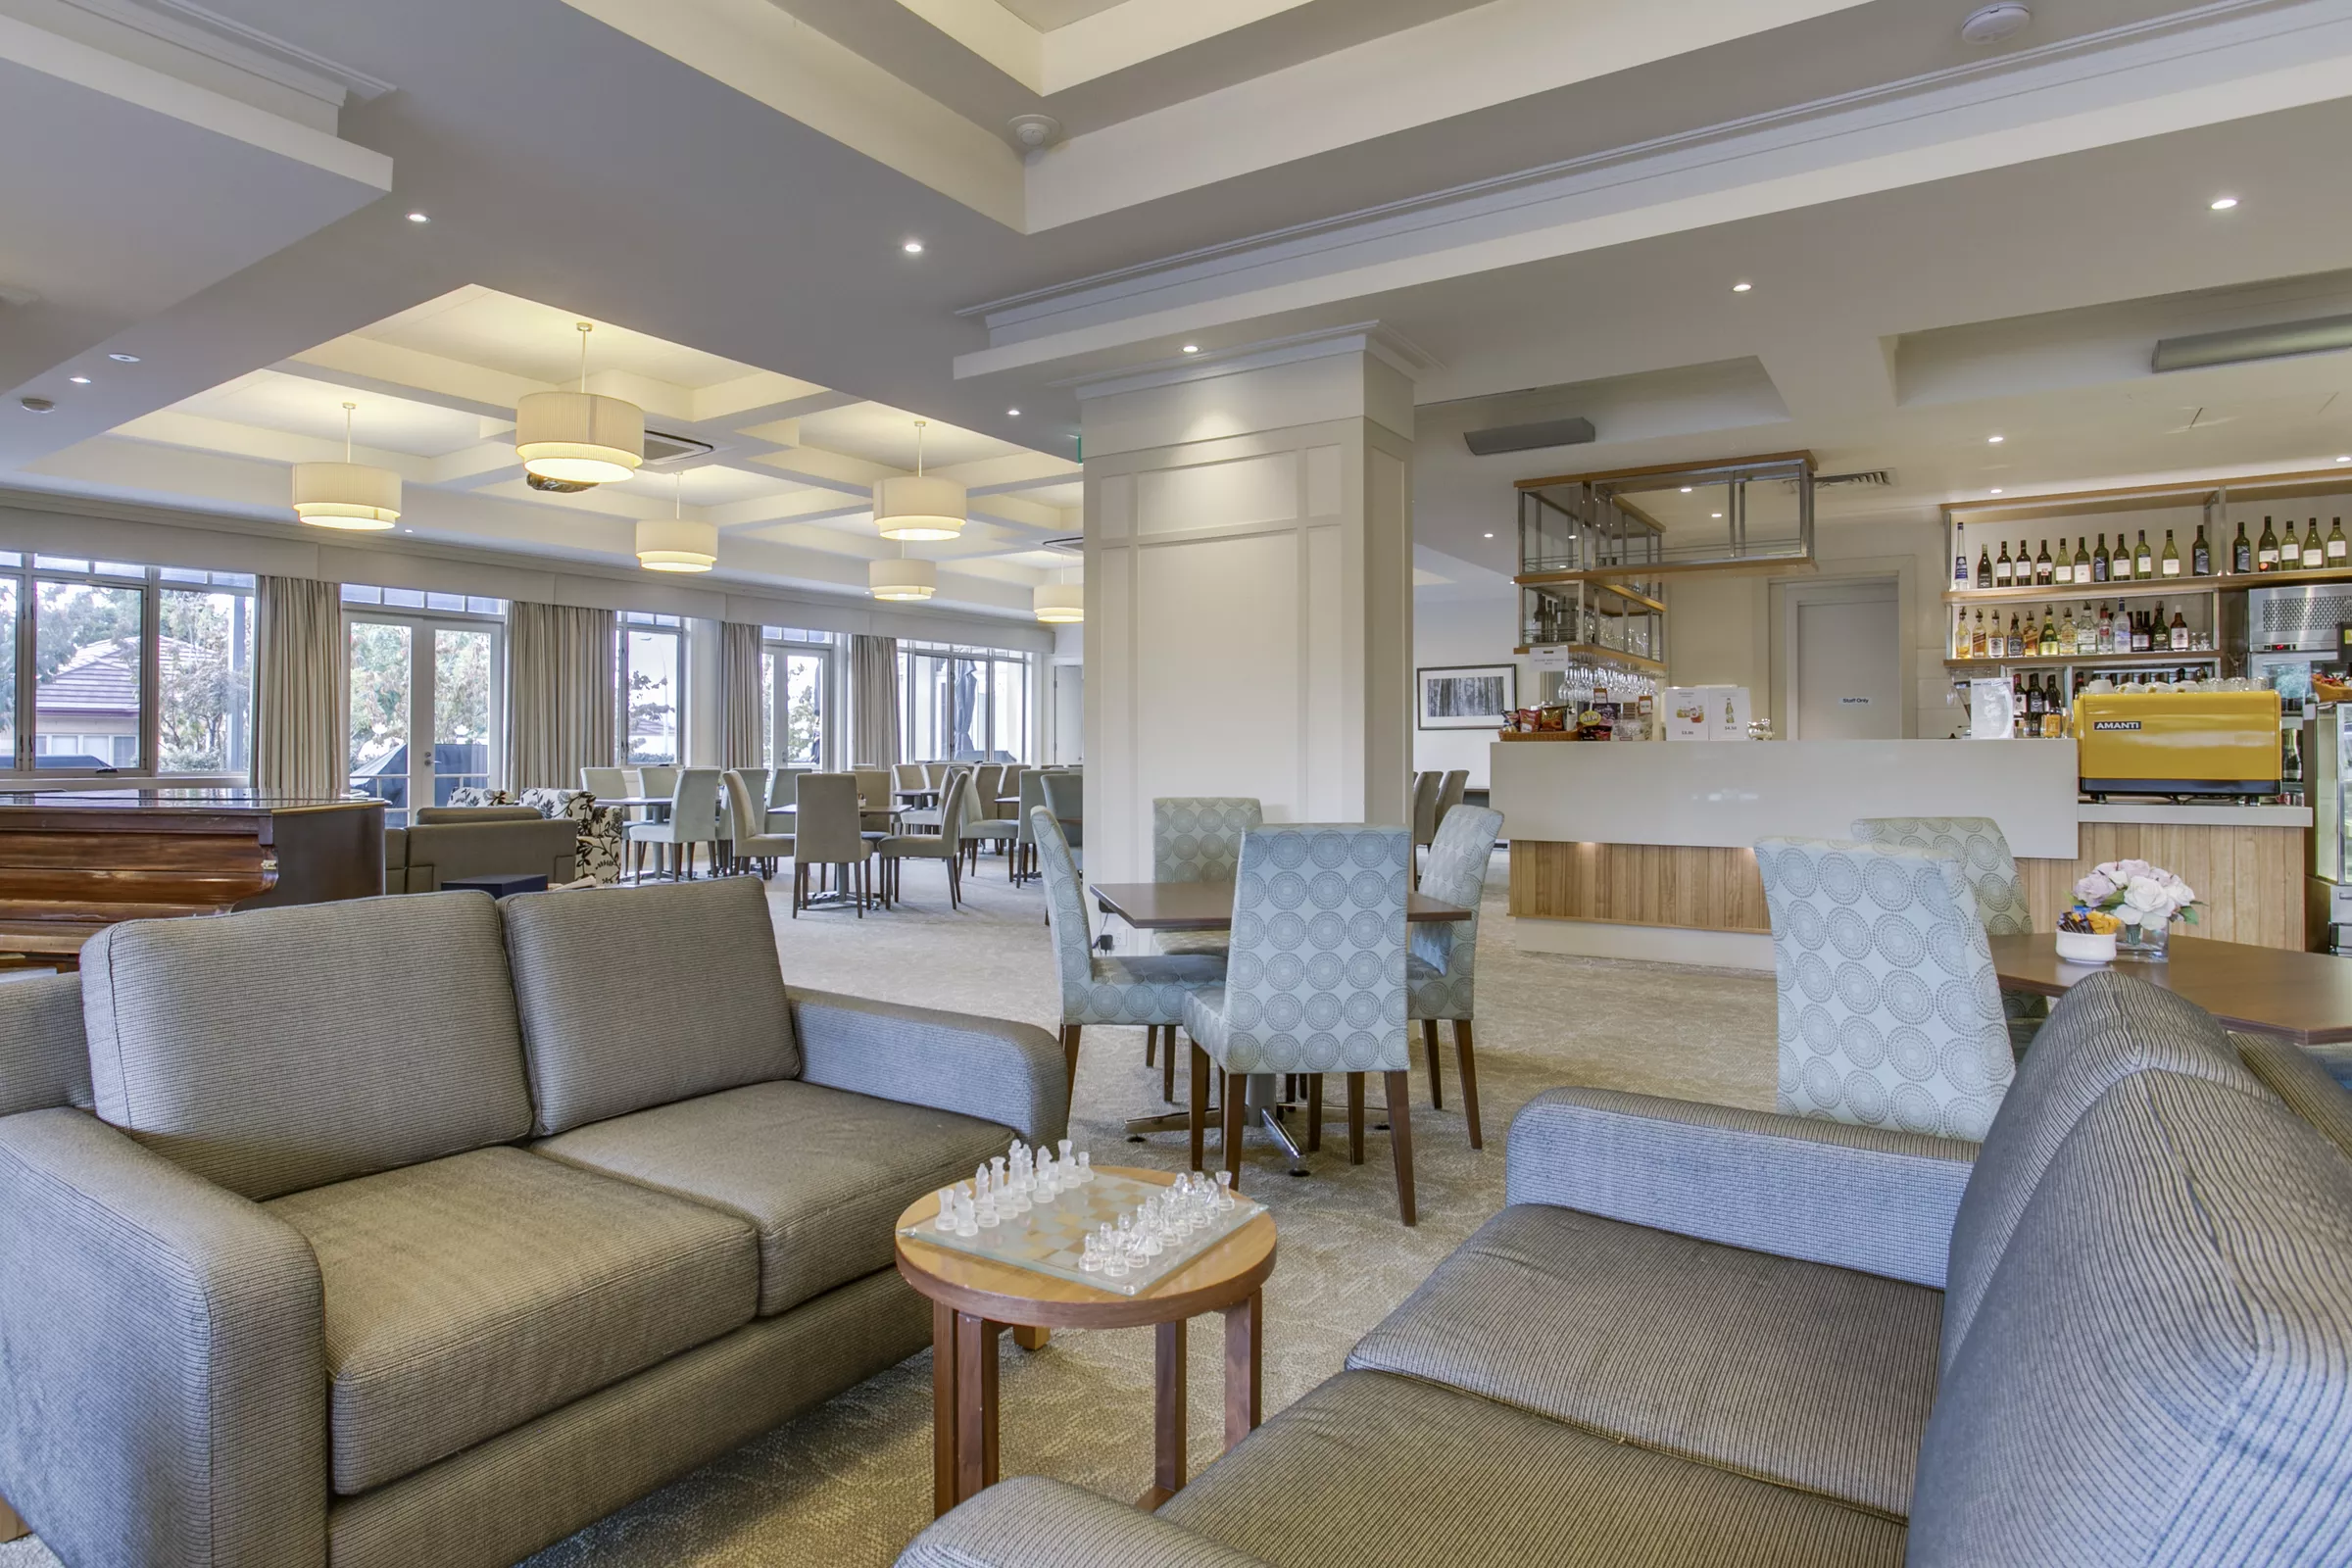 Waverley Country Club bar and cafe area with lounge and dining style seating